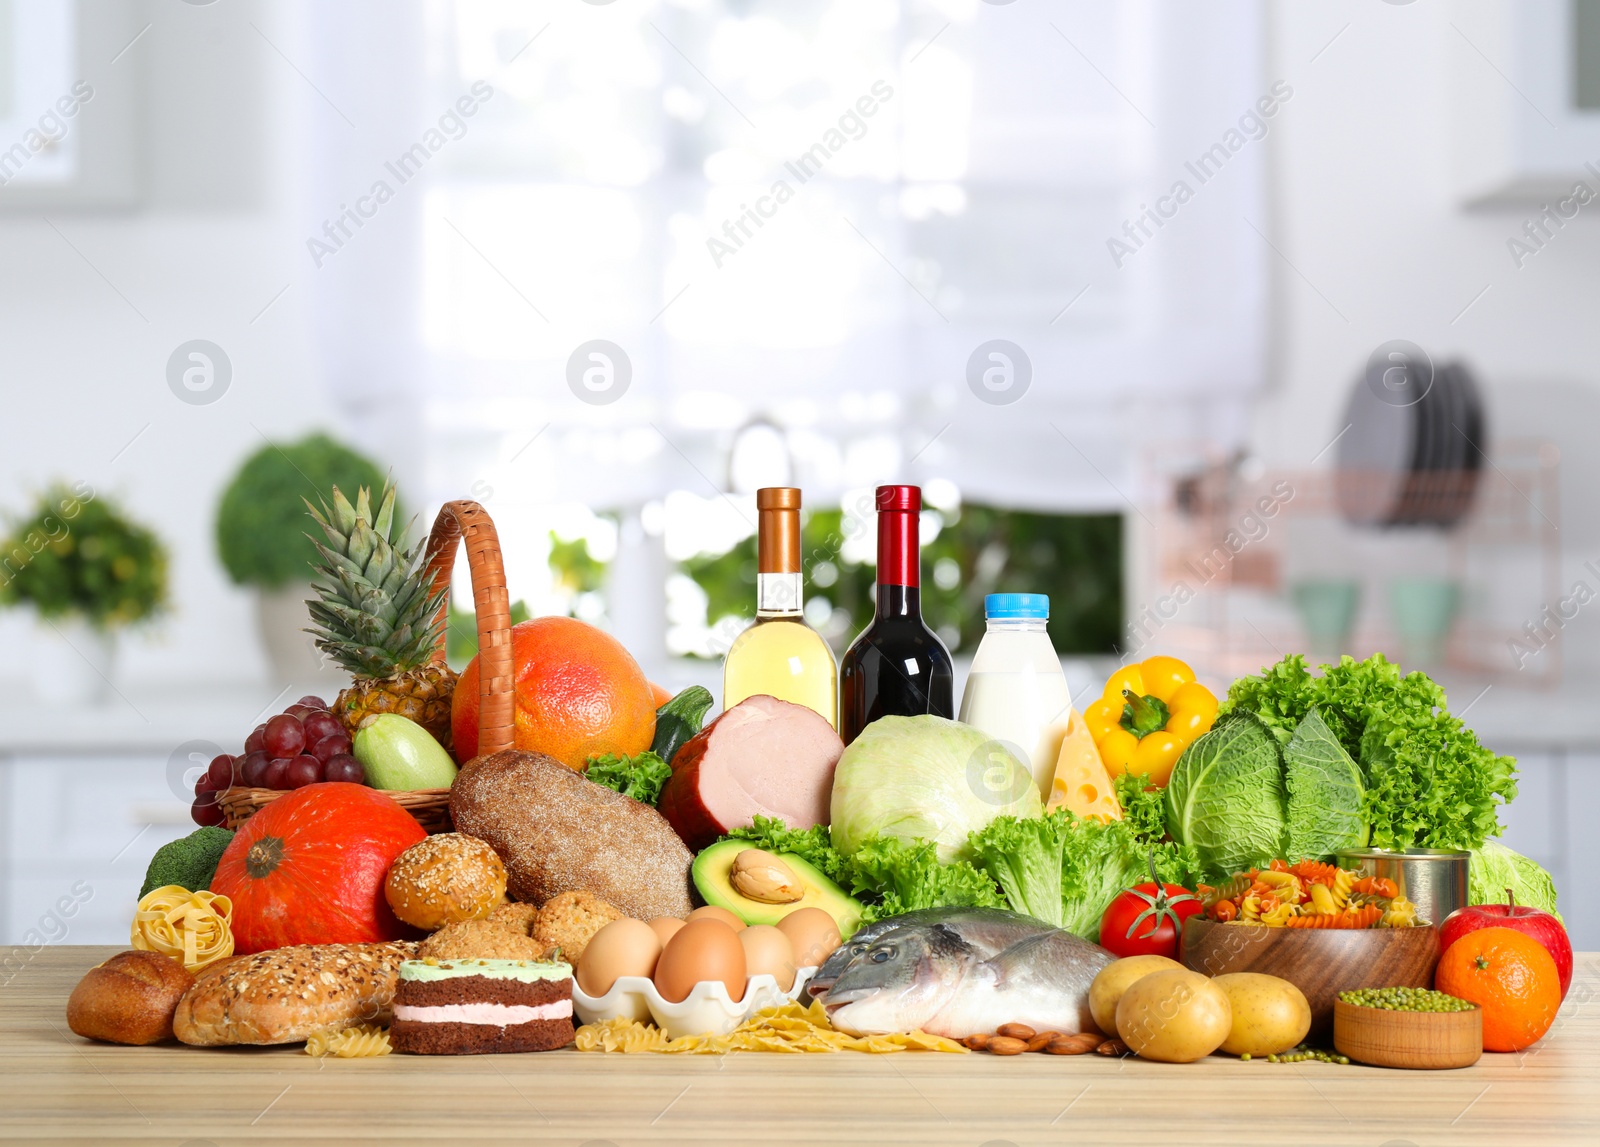 Image of Different products on wooden table in kitchen. Balanced food